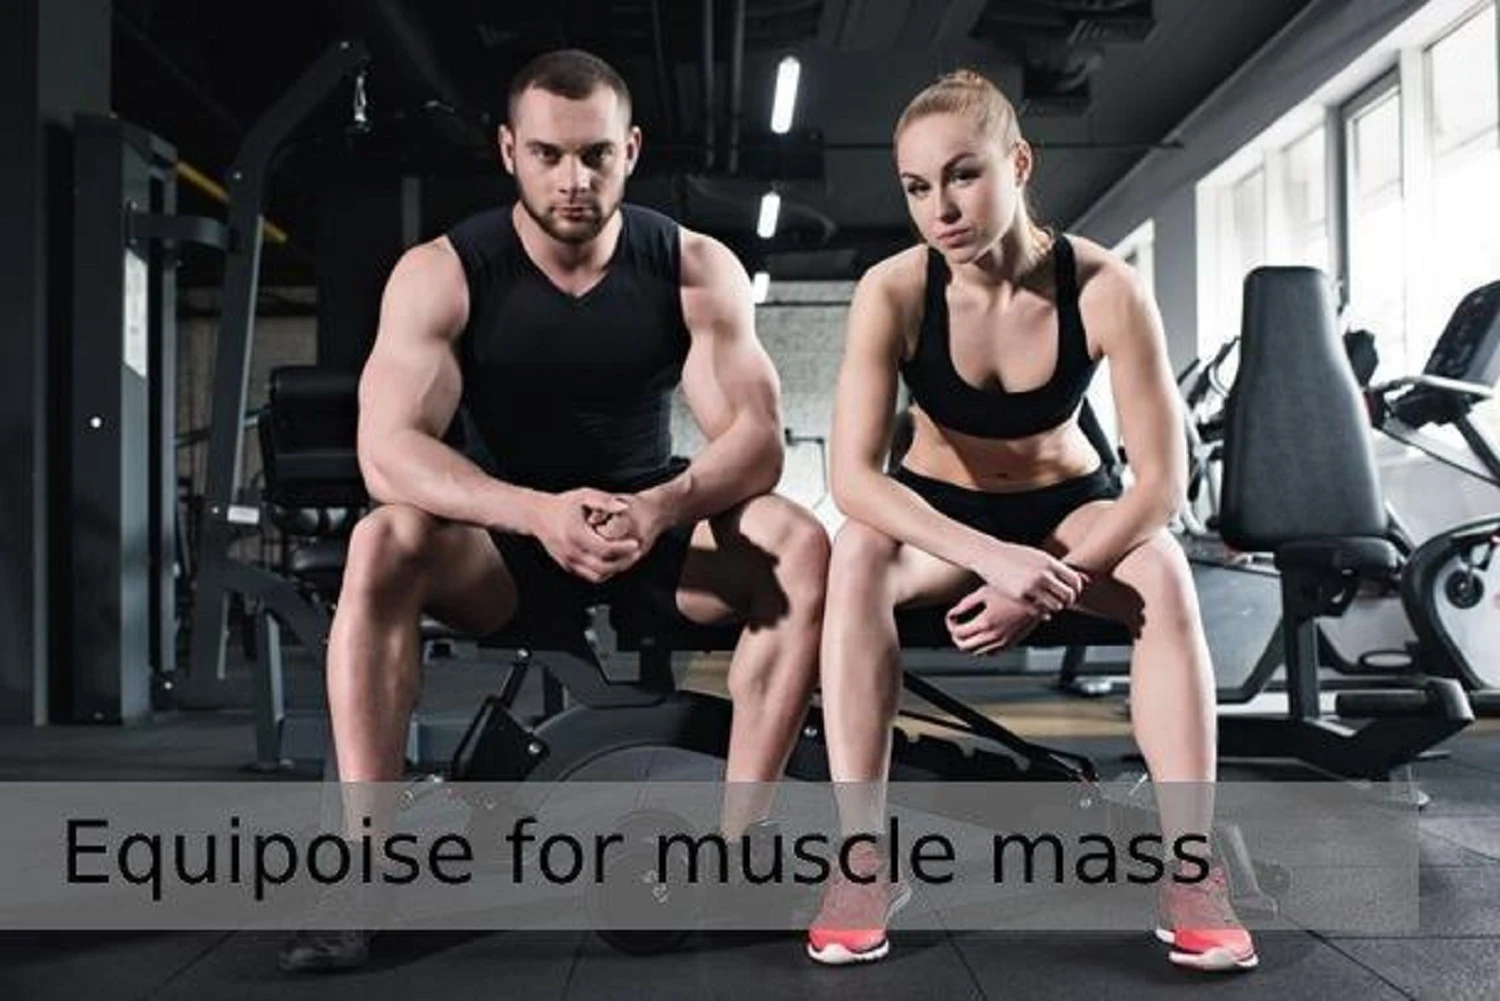 How Effective Is Equipoise for Muscle Gain